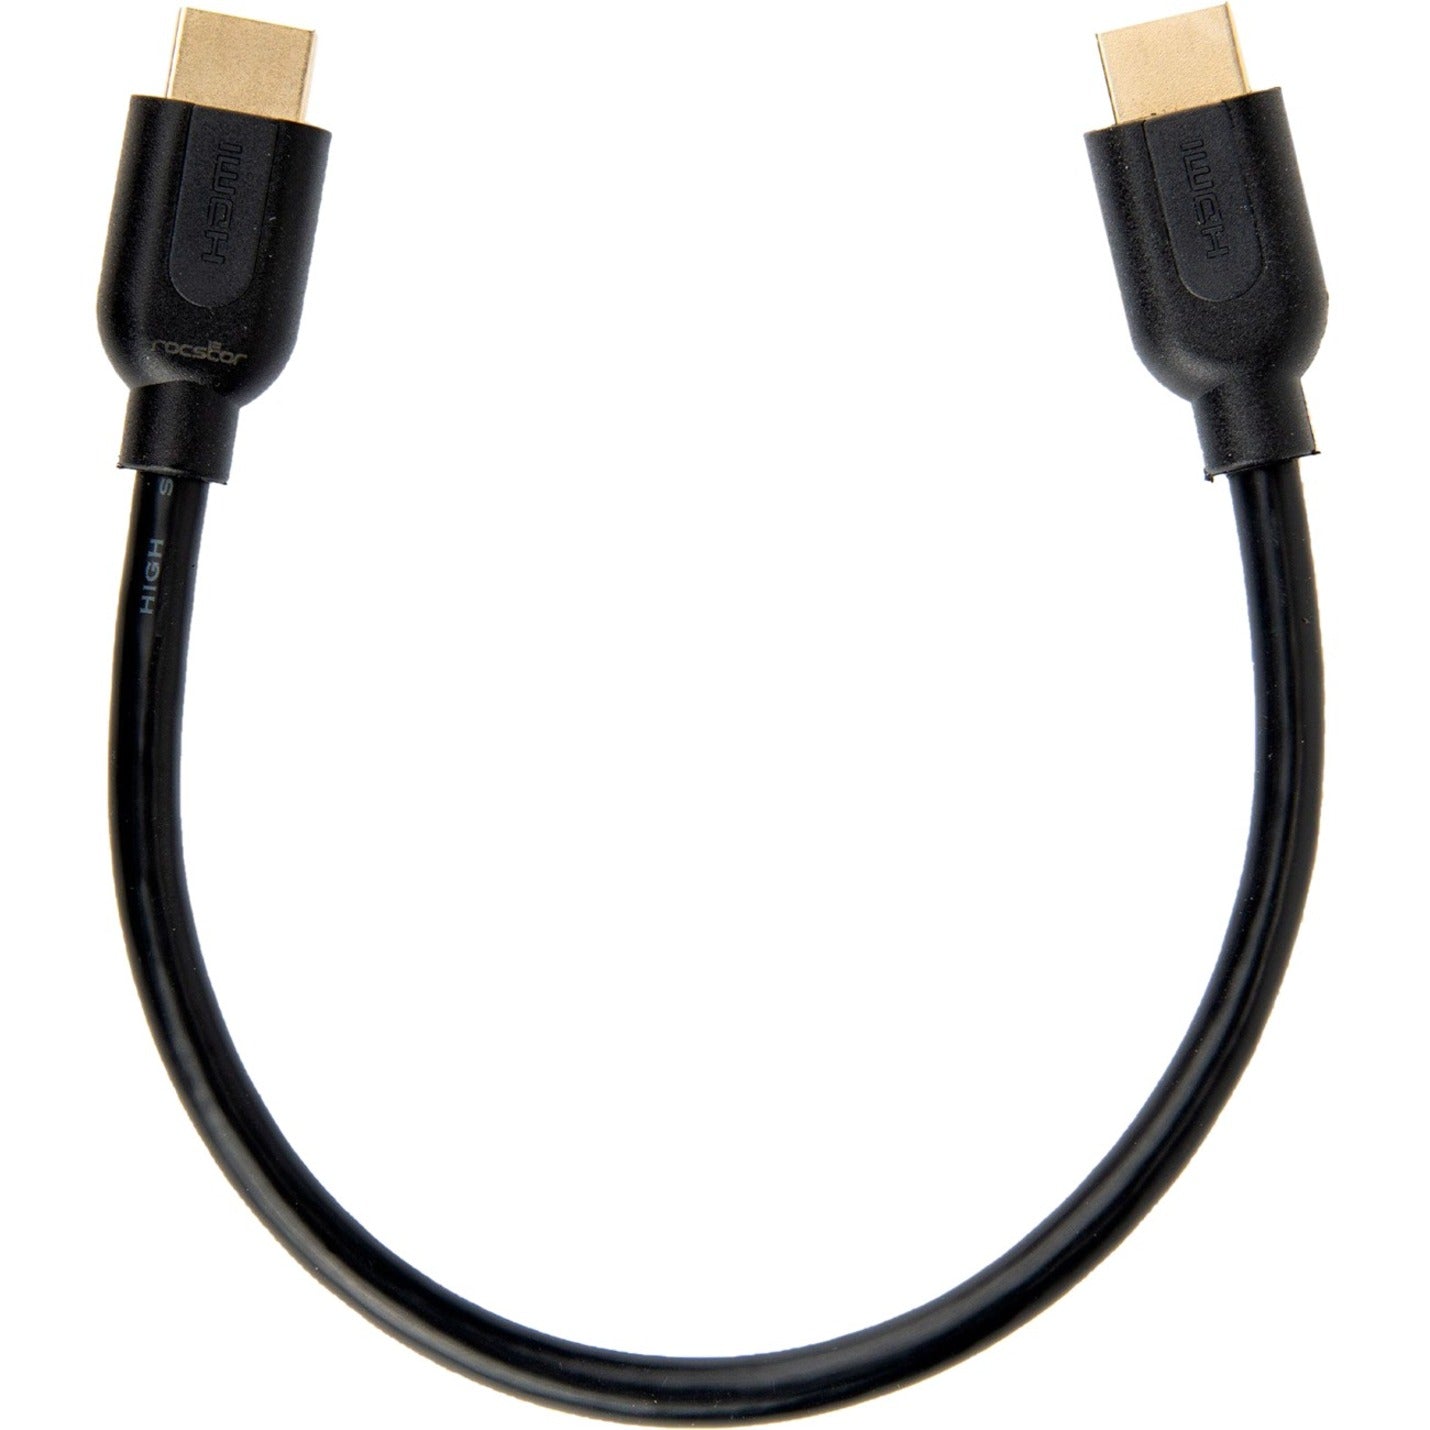 Rocstor Y10C156-B1 Premium High Speed HDMI Cable with Ethernet 1-ft, Black